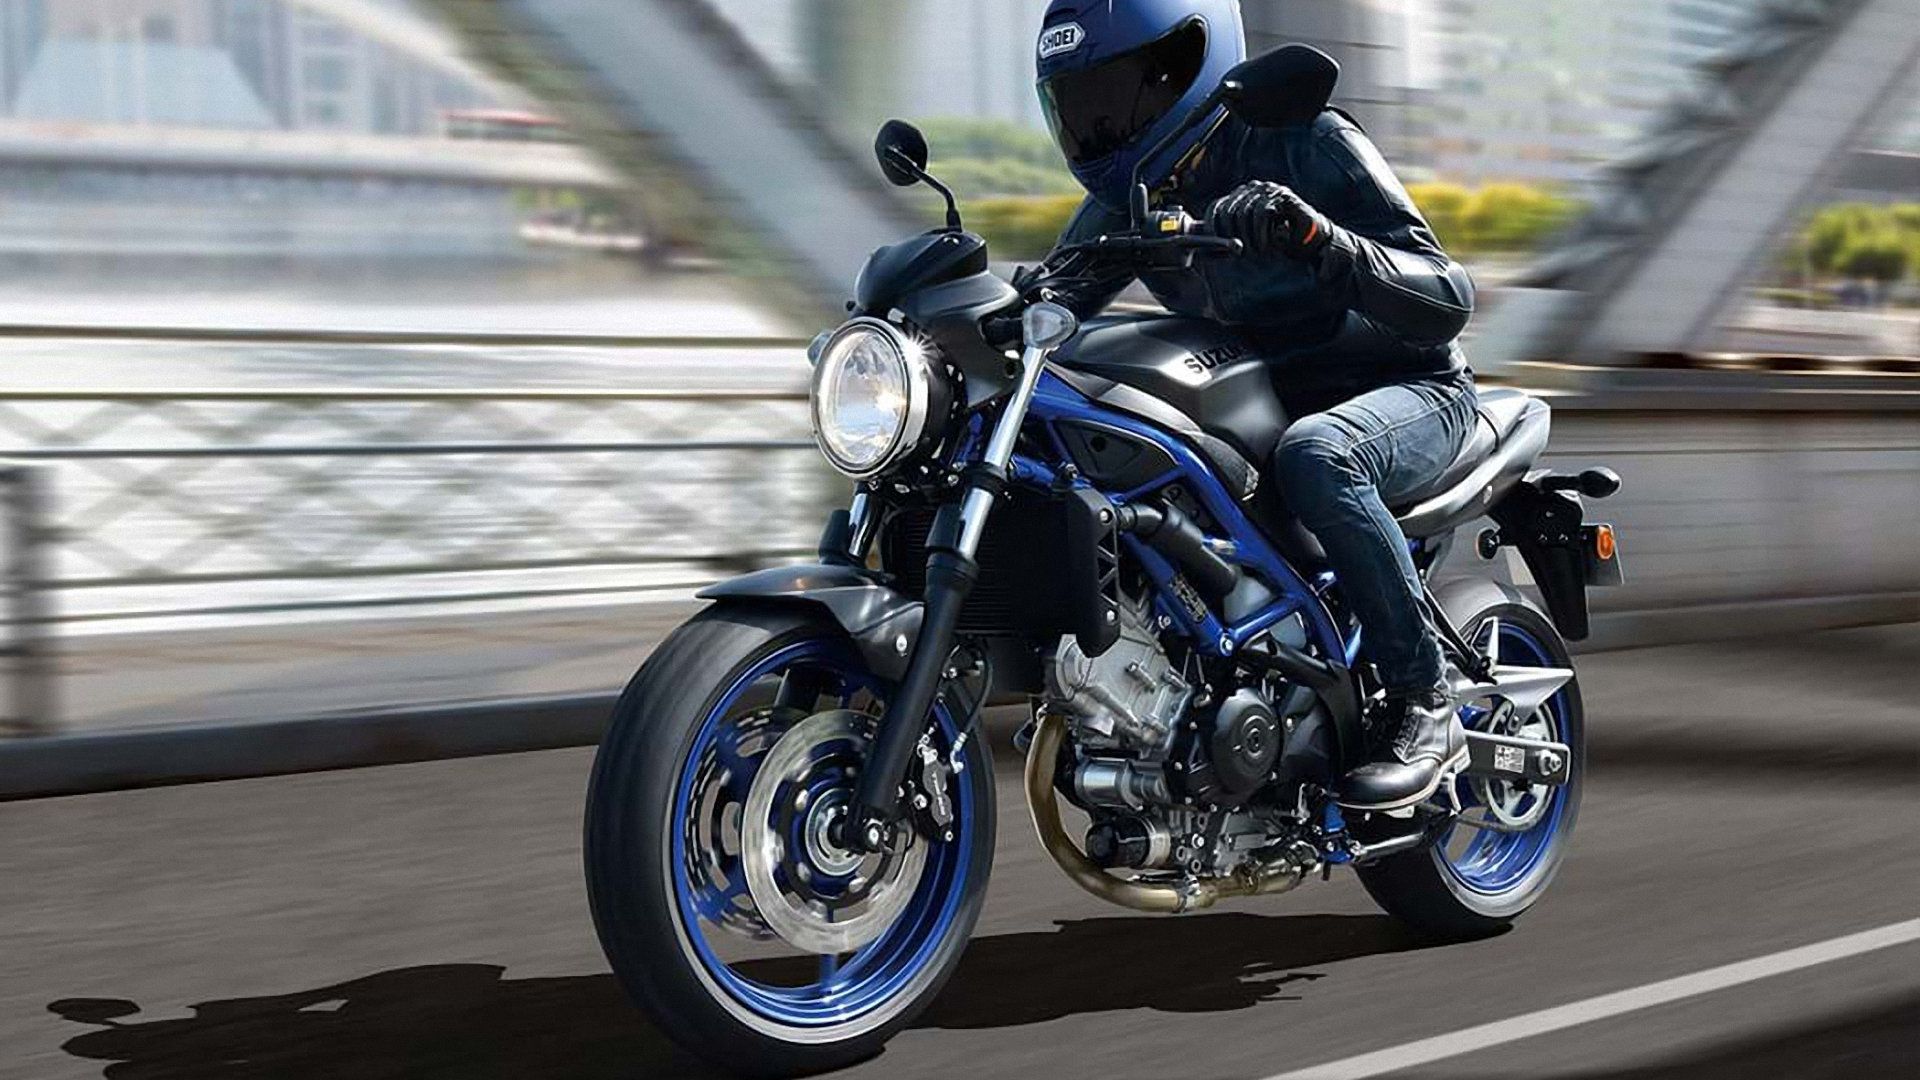 10 fastest motorcycles under $15,000